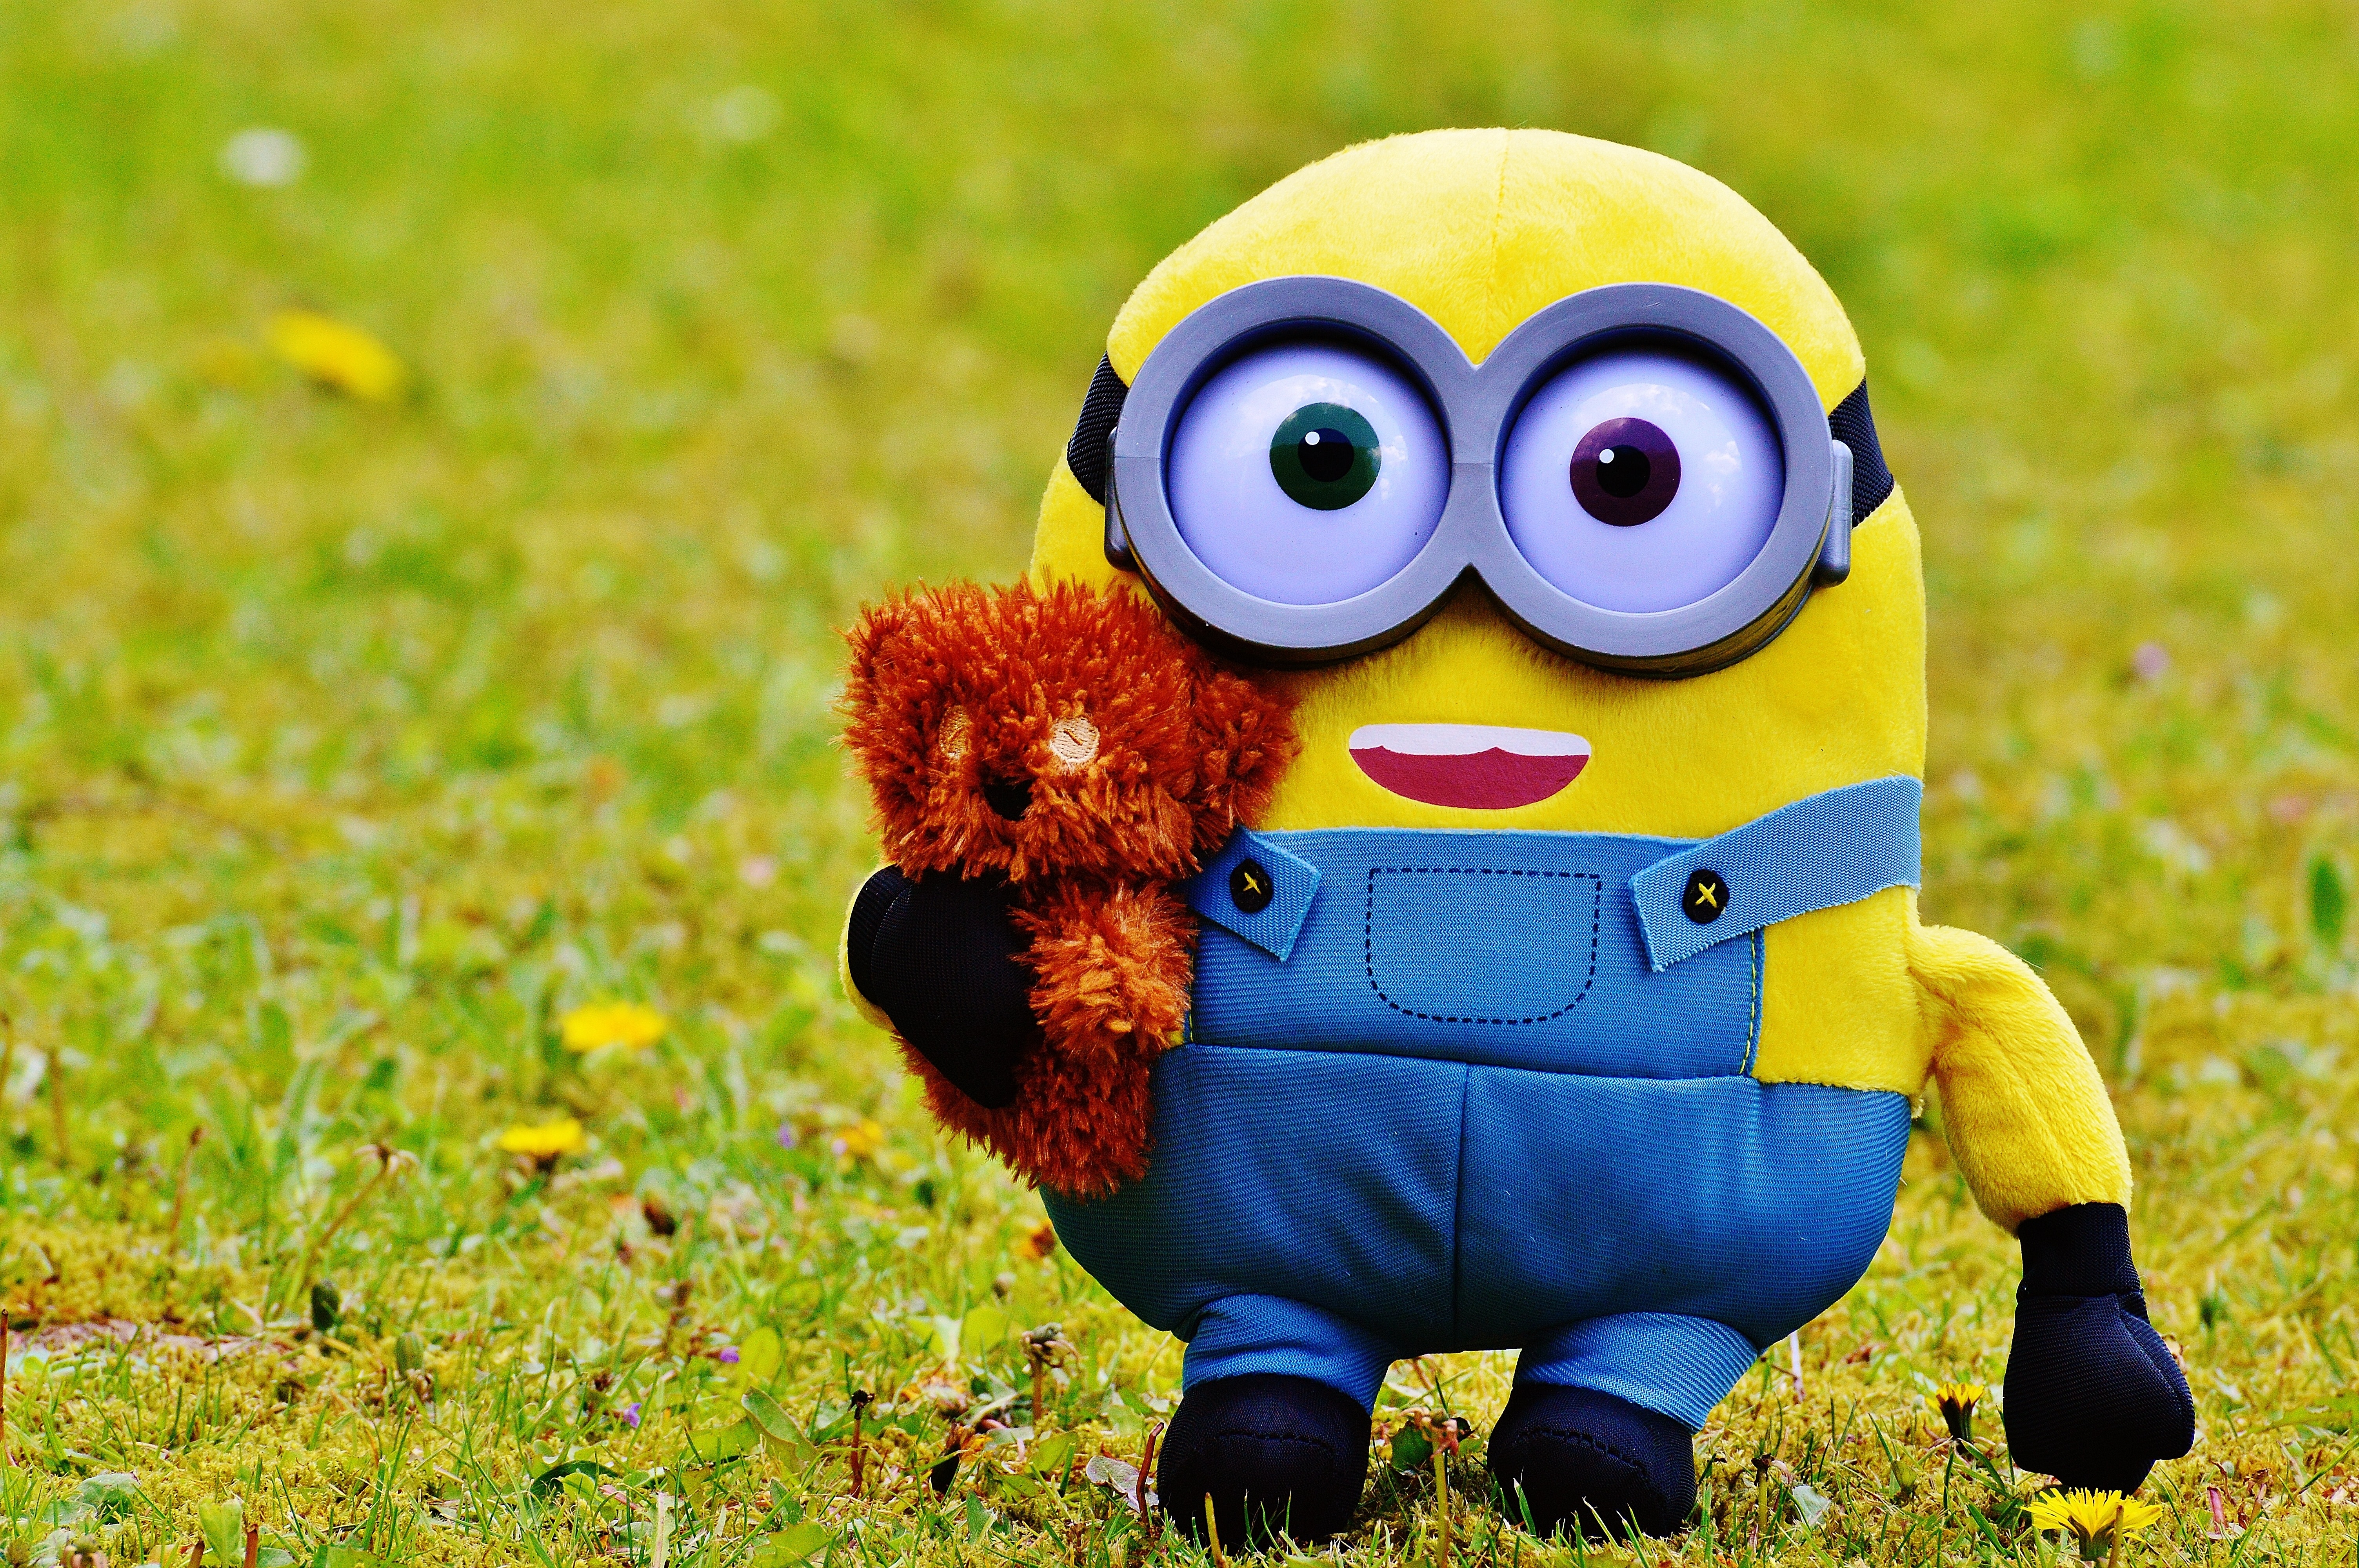 minion carrying brown teddy bear plush toy on grass